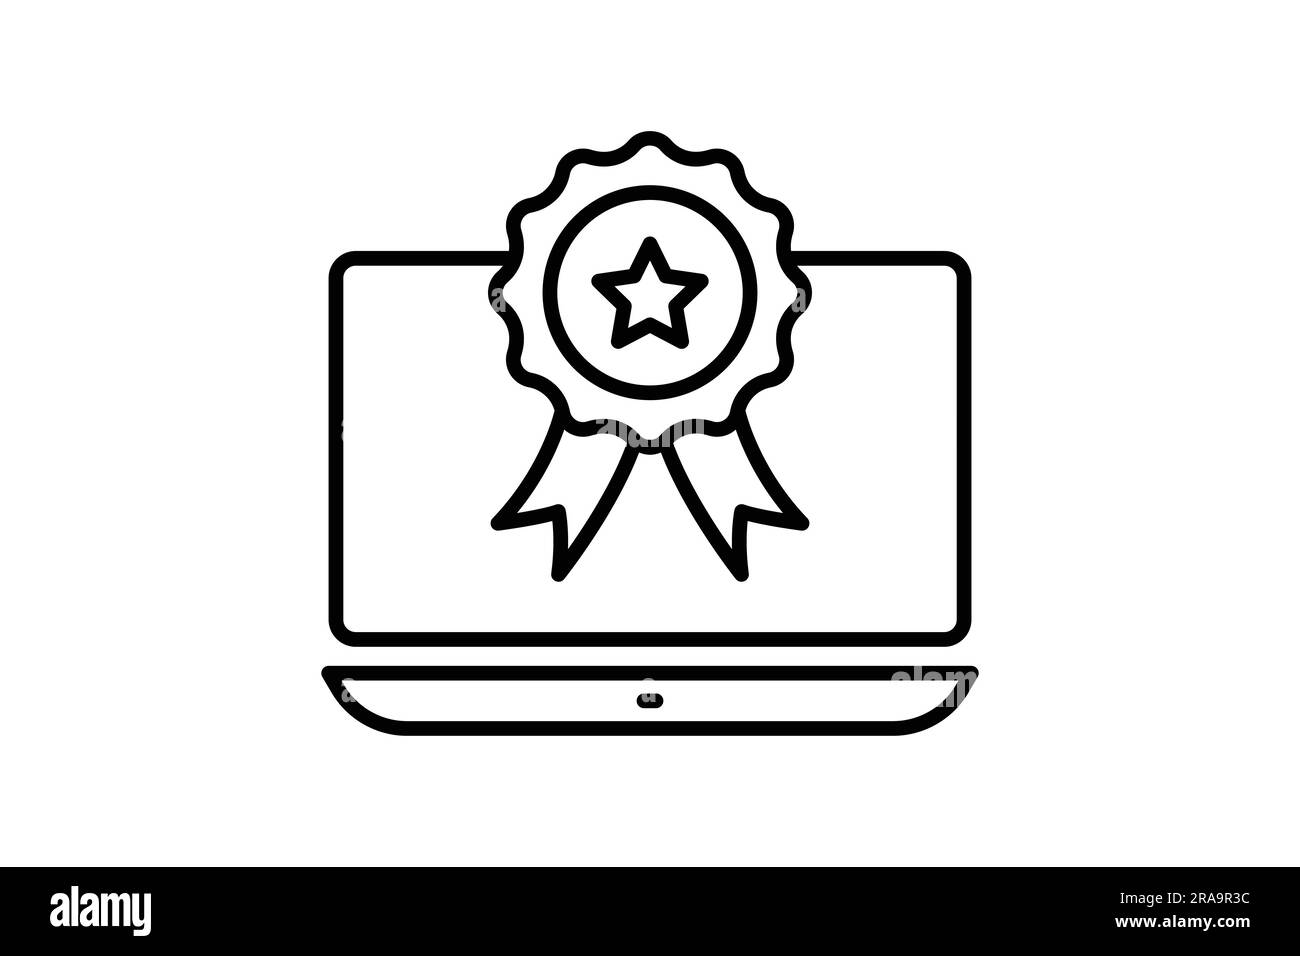 competition win icon. winner award ceremony, medal on the laptop. icon related to winner, success, victory. Line icon style design. Simple vector desi Stock Vector